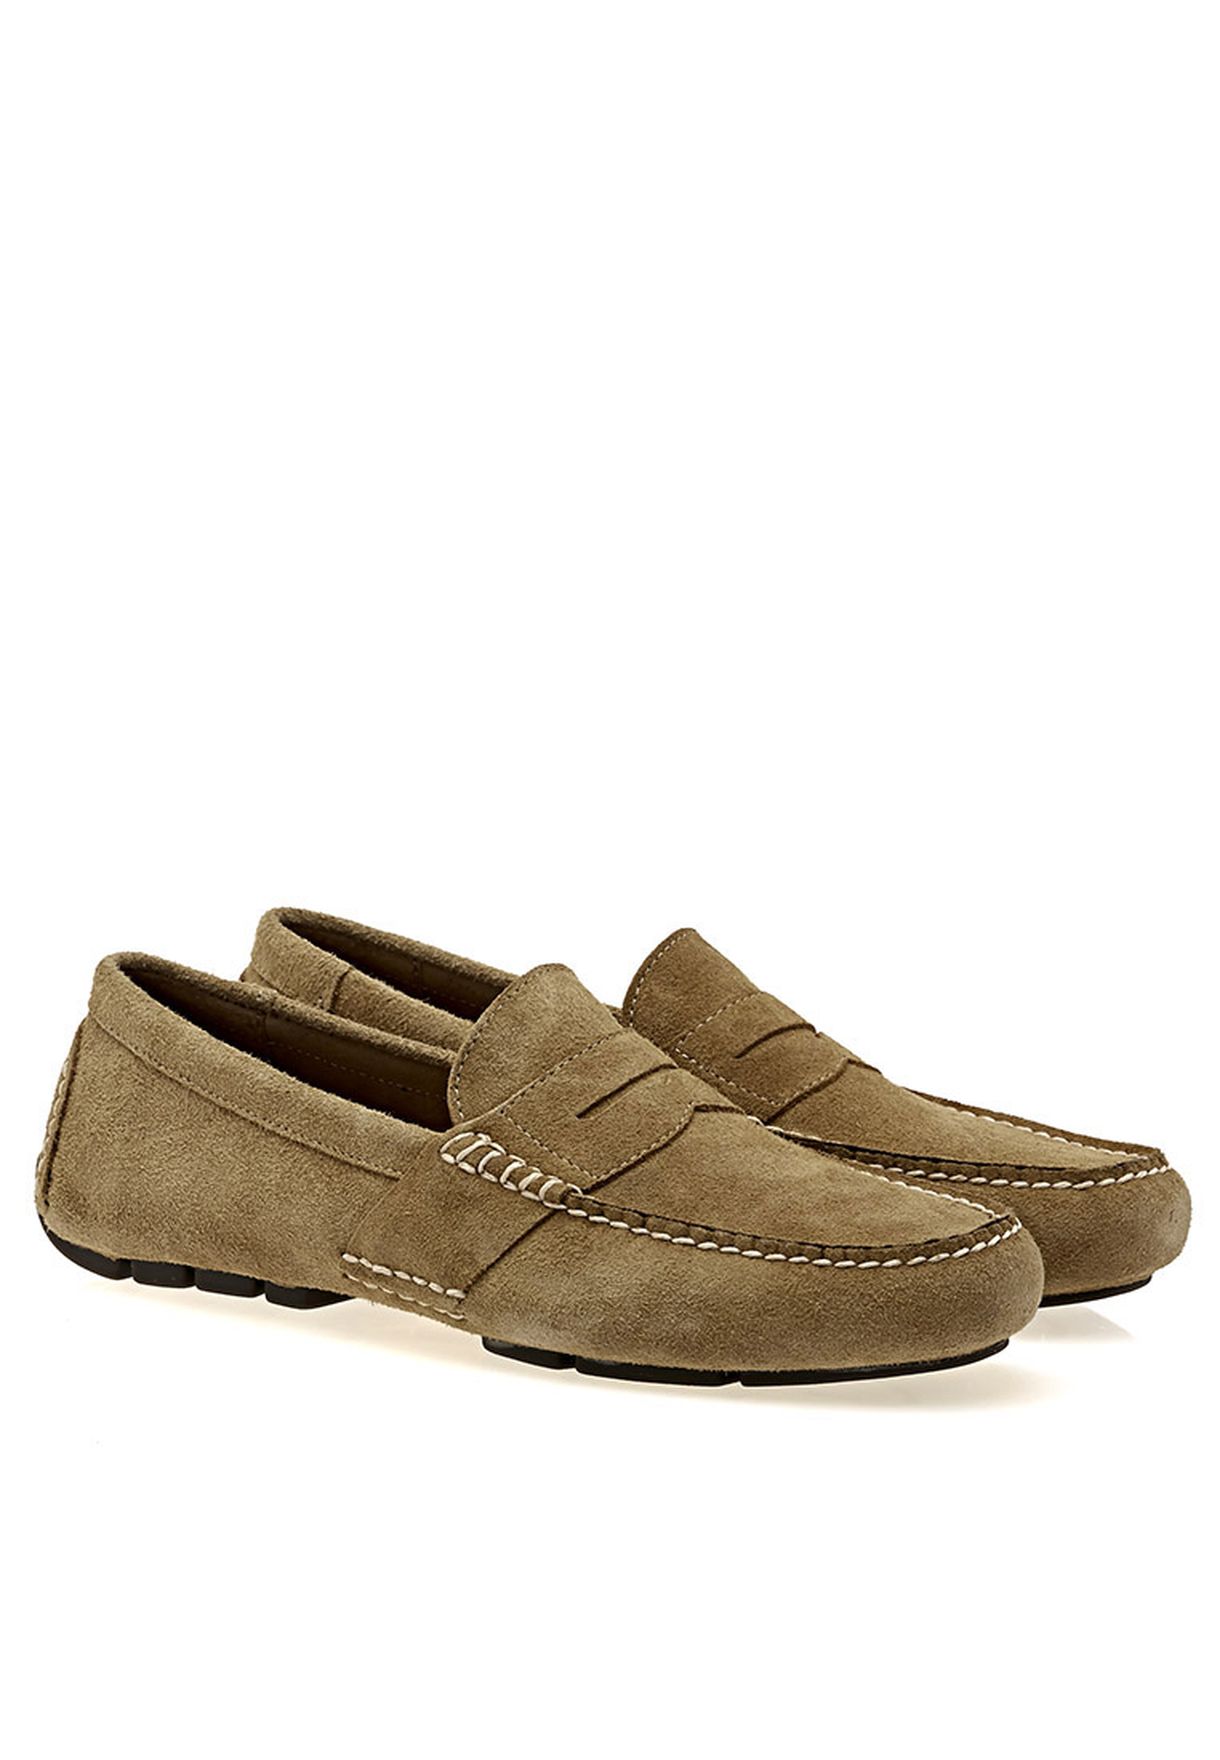 polo moccasin shoes